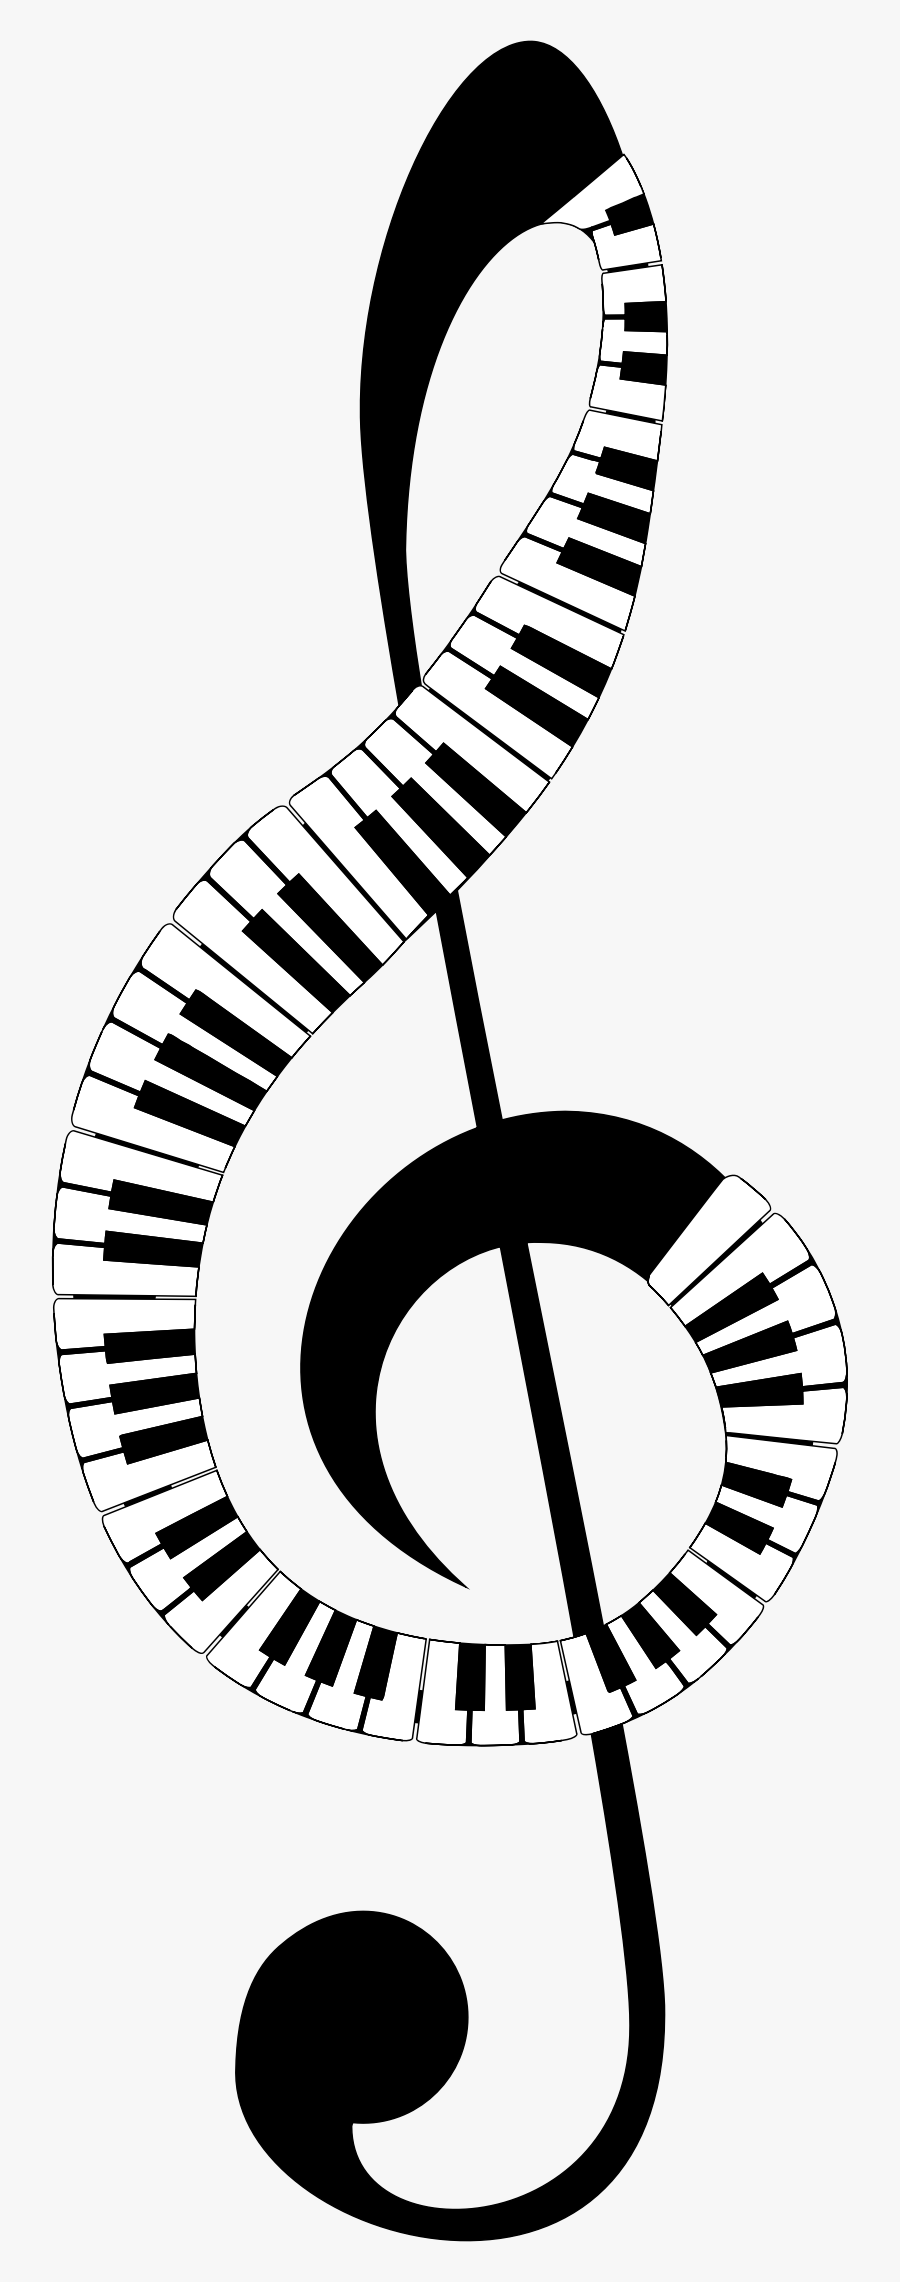 Clef Keyboard Recreation With - Transparent Background Treble Clef Clipart, Transparent Clipart